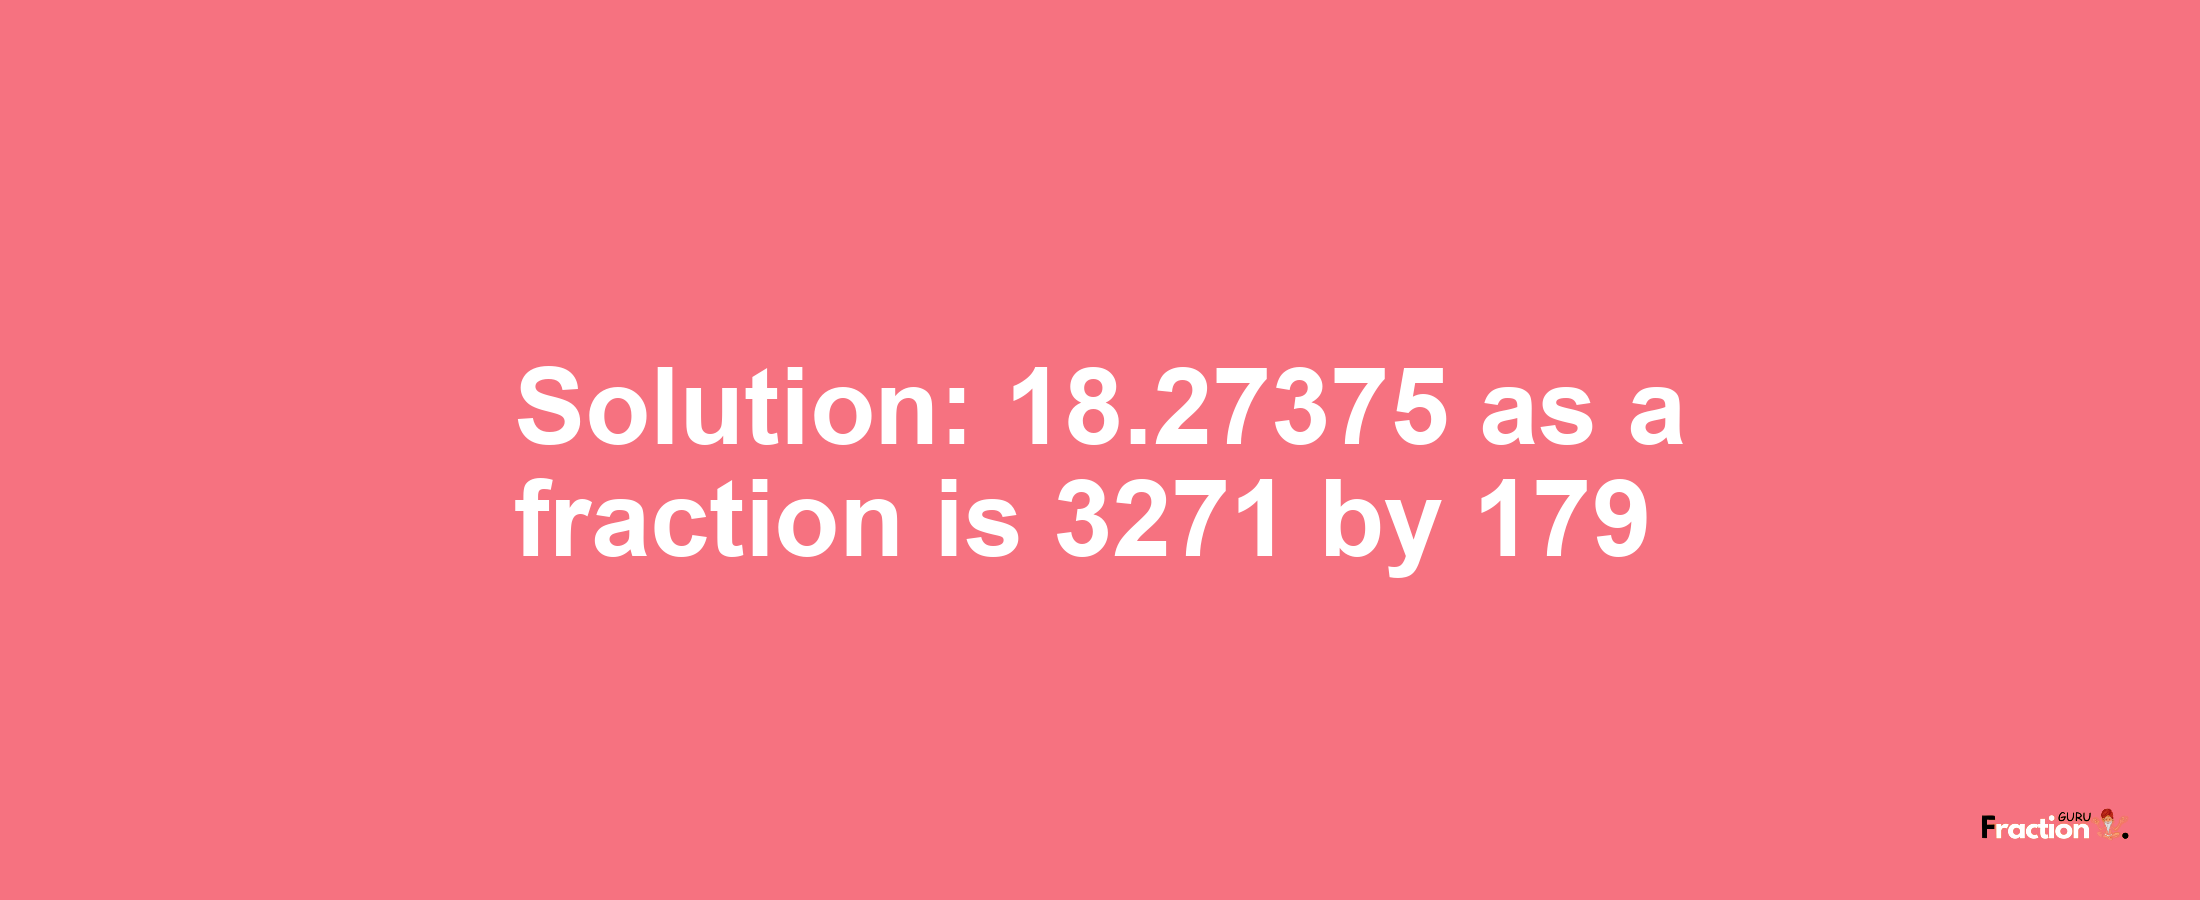 Solution:18.27375 as a fraction is 3271/179